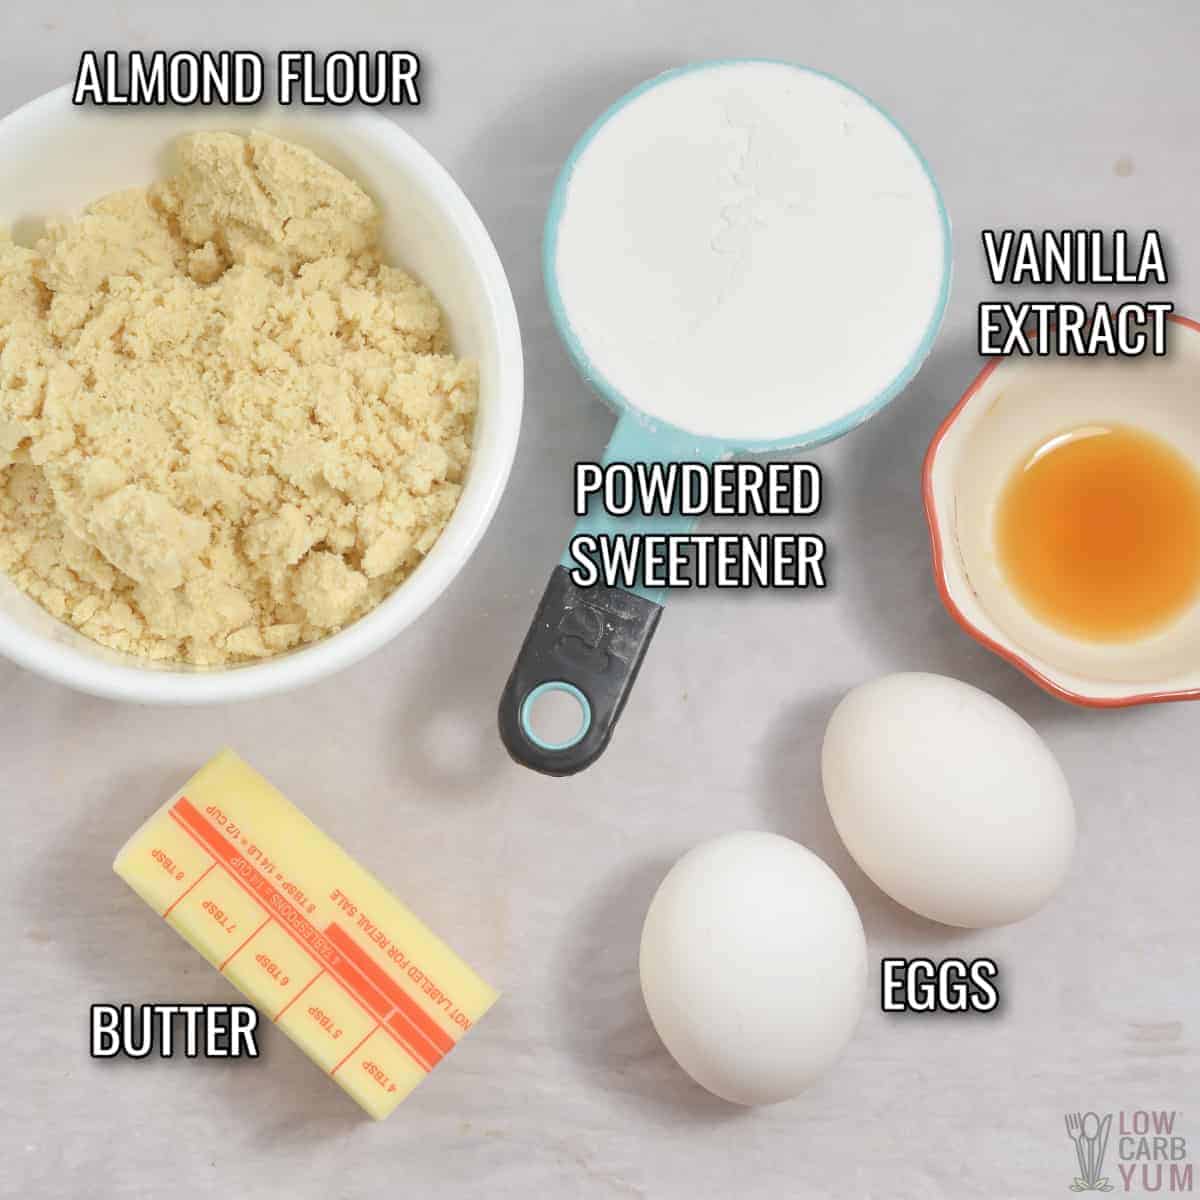 baking ingredients including butter, eggs and vanilla extract